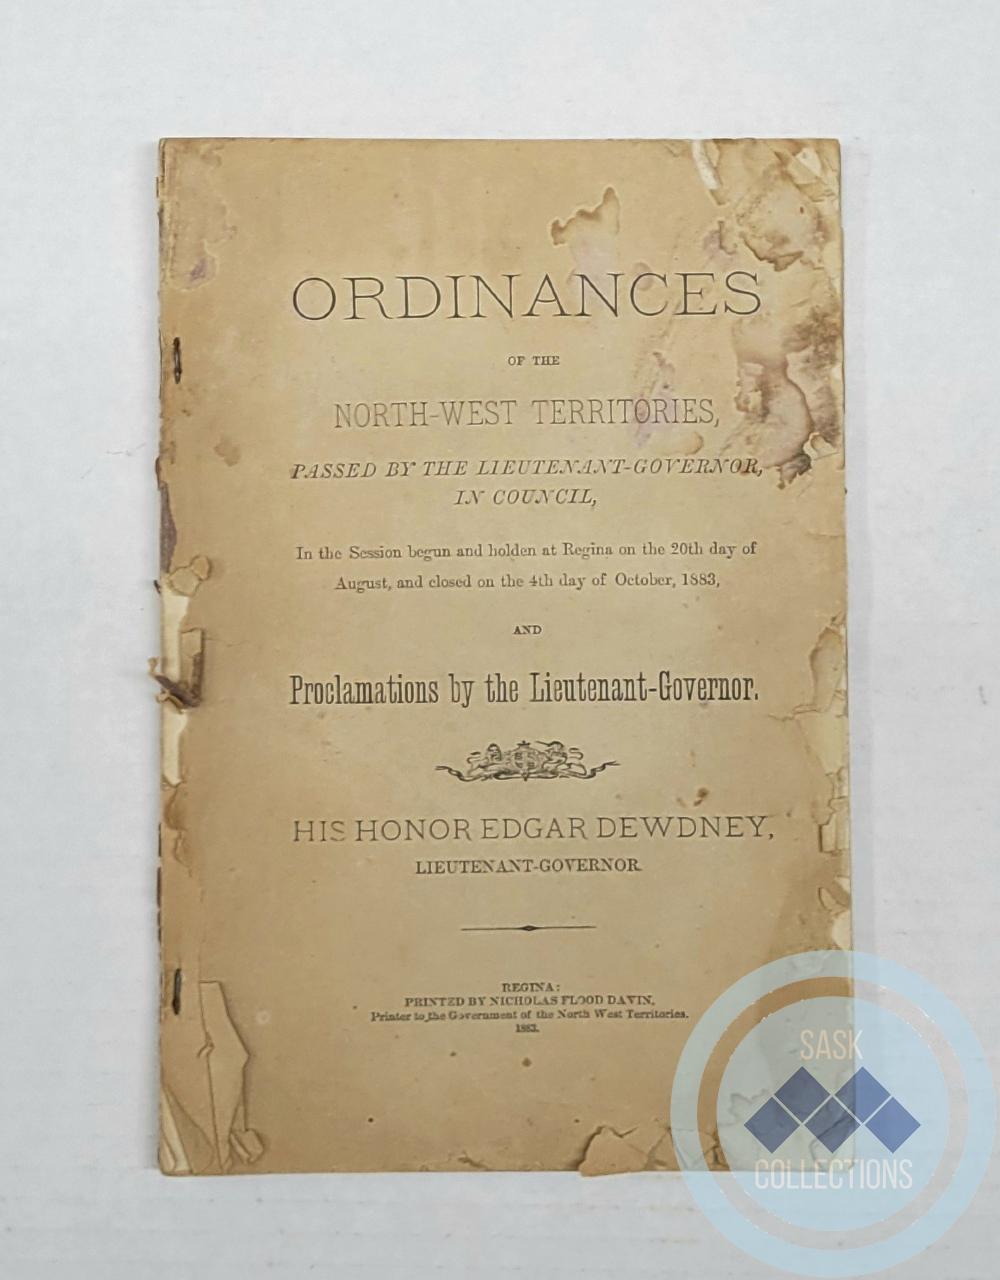 Ordinances of the North-West Territories Book